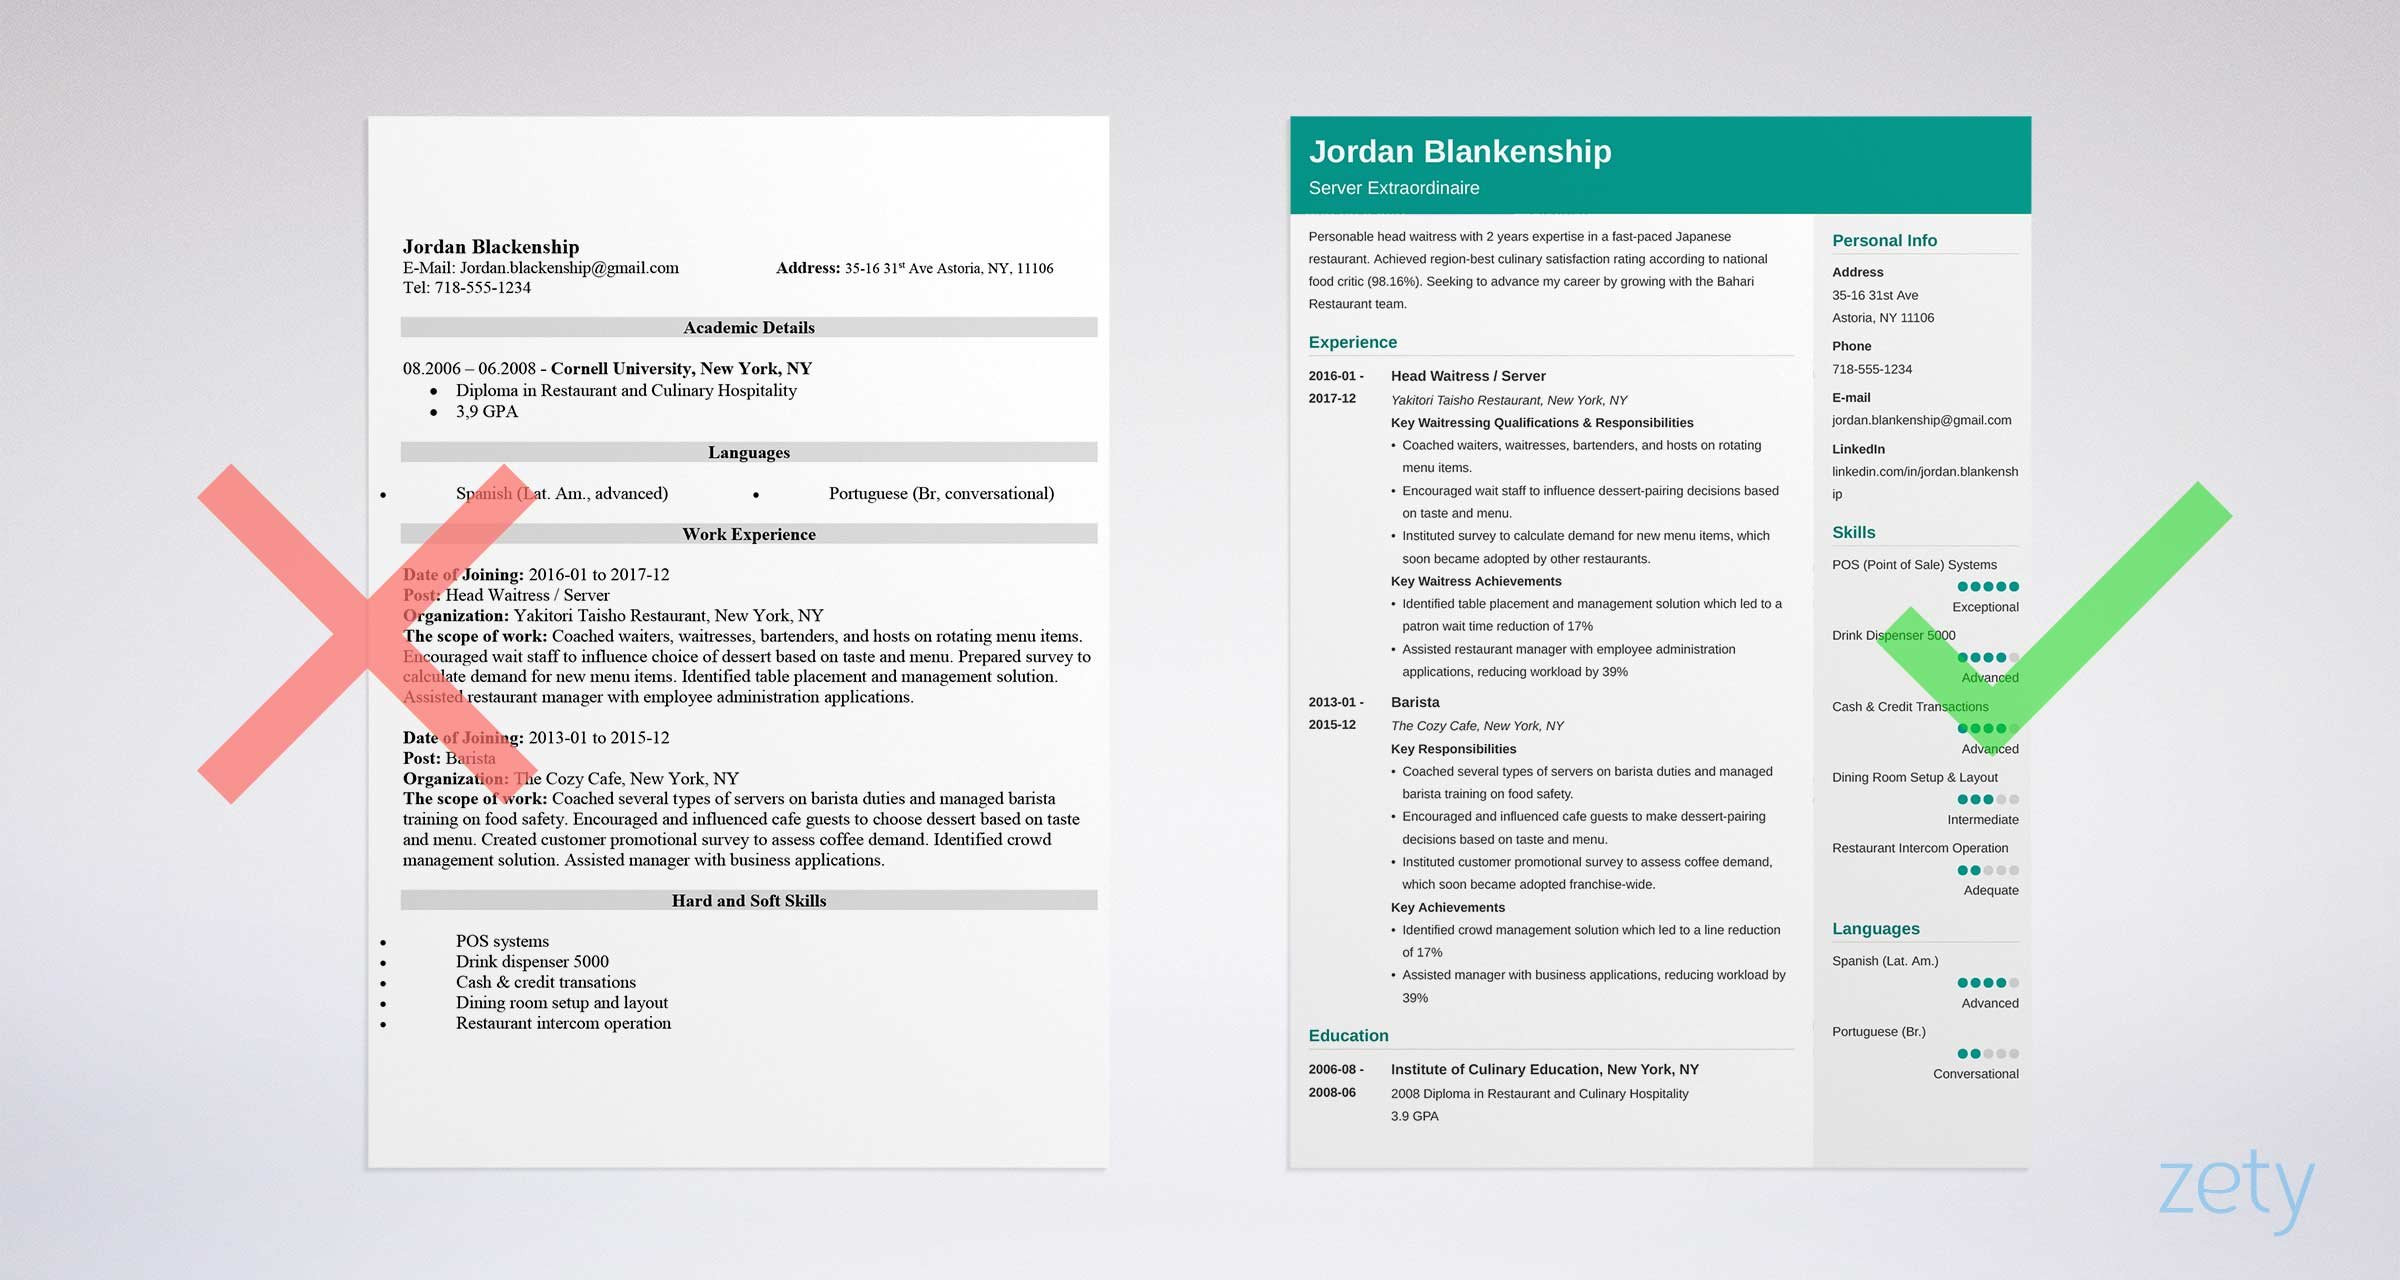 Resume Template for Food Service Industry Food Service Resume Examples [with Skills & Job Description]